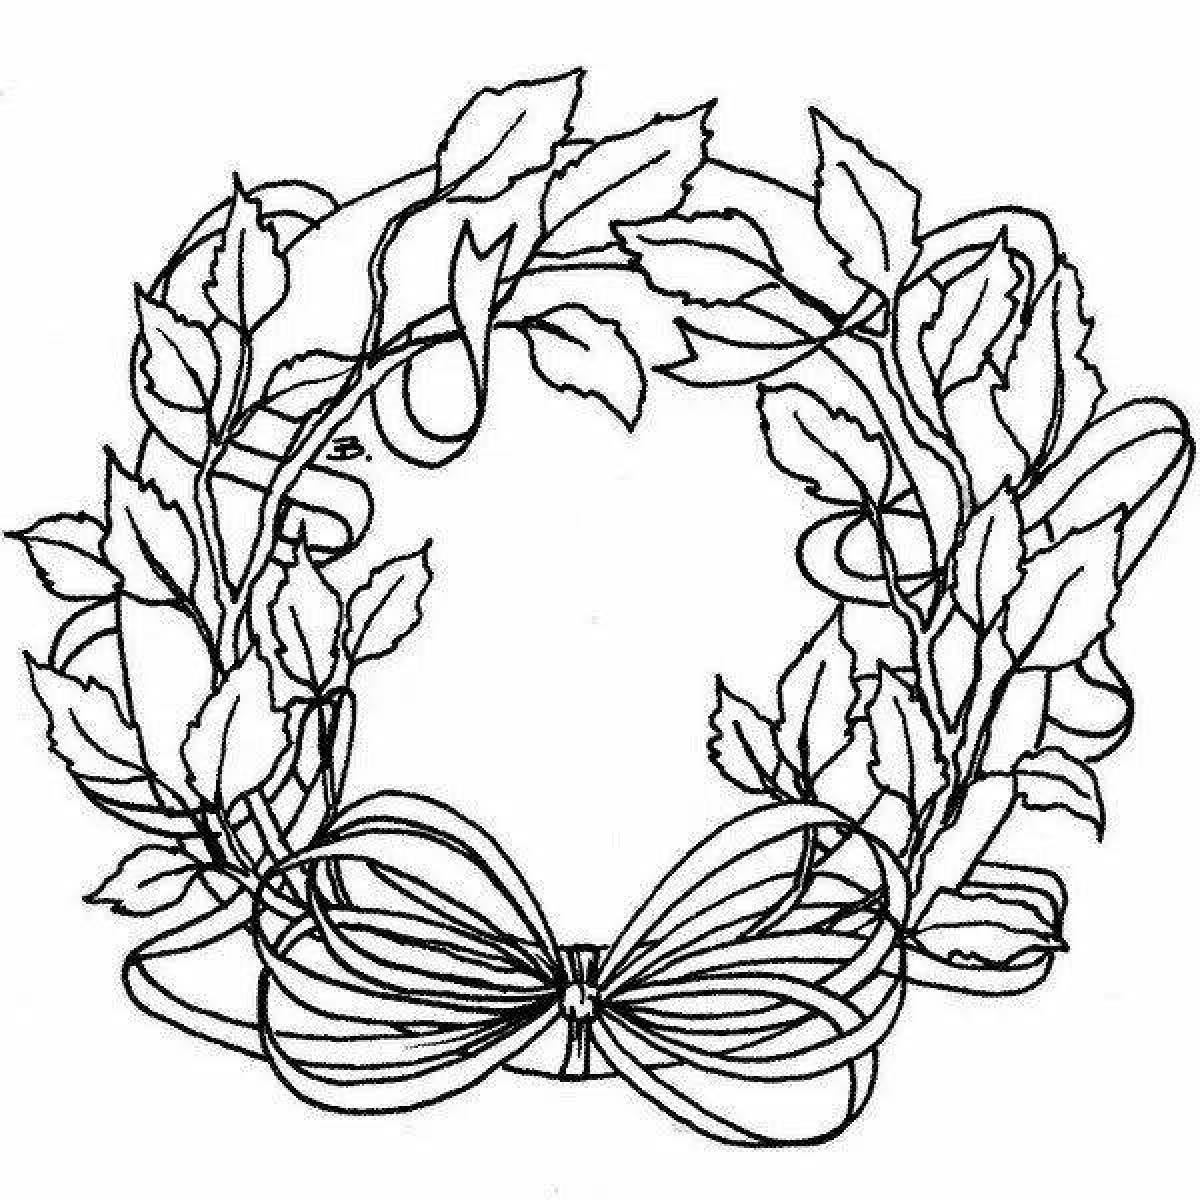 Luminous wreath coloring page